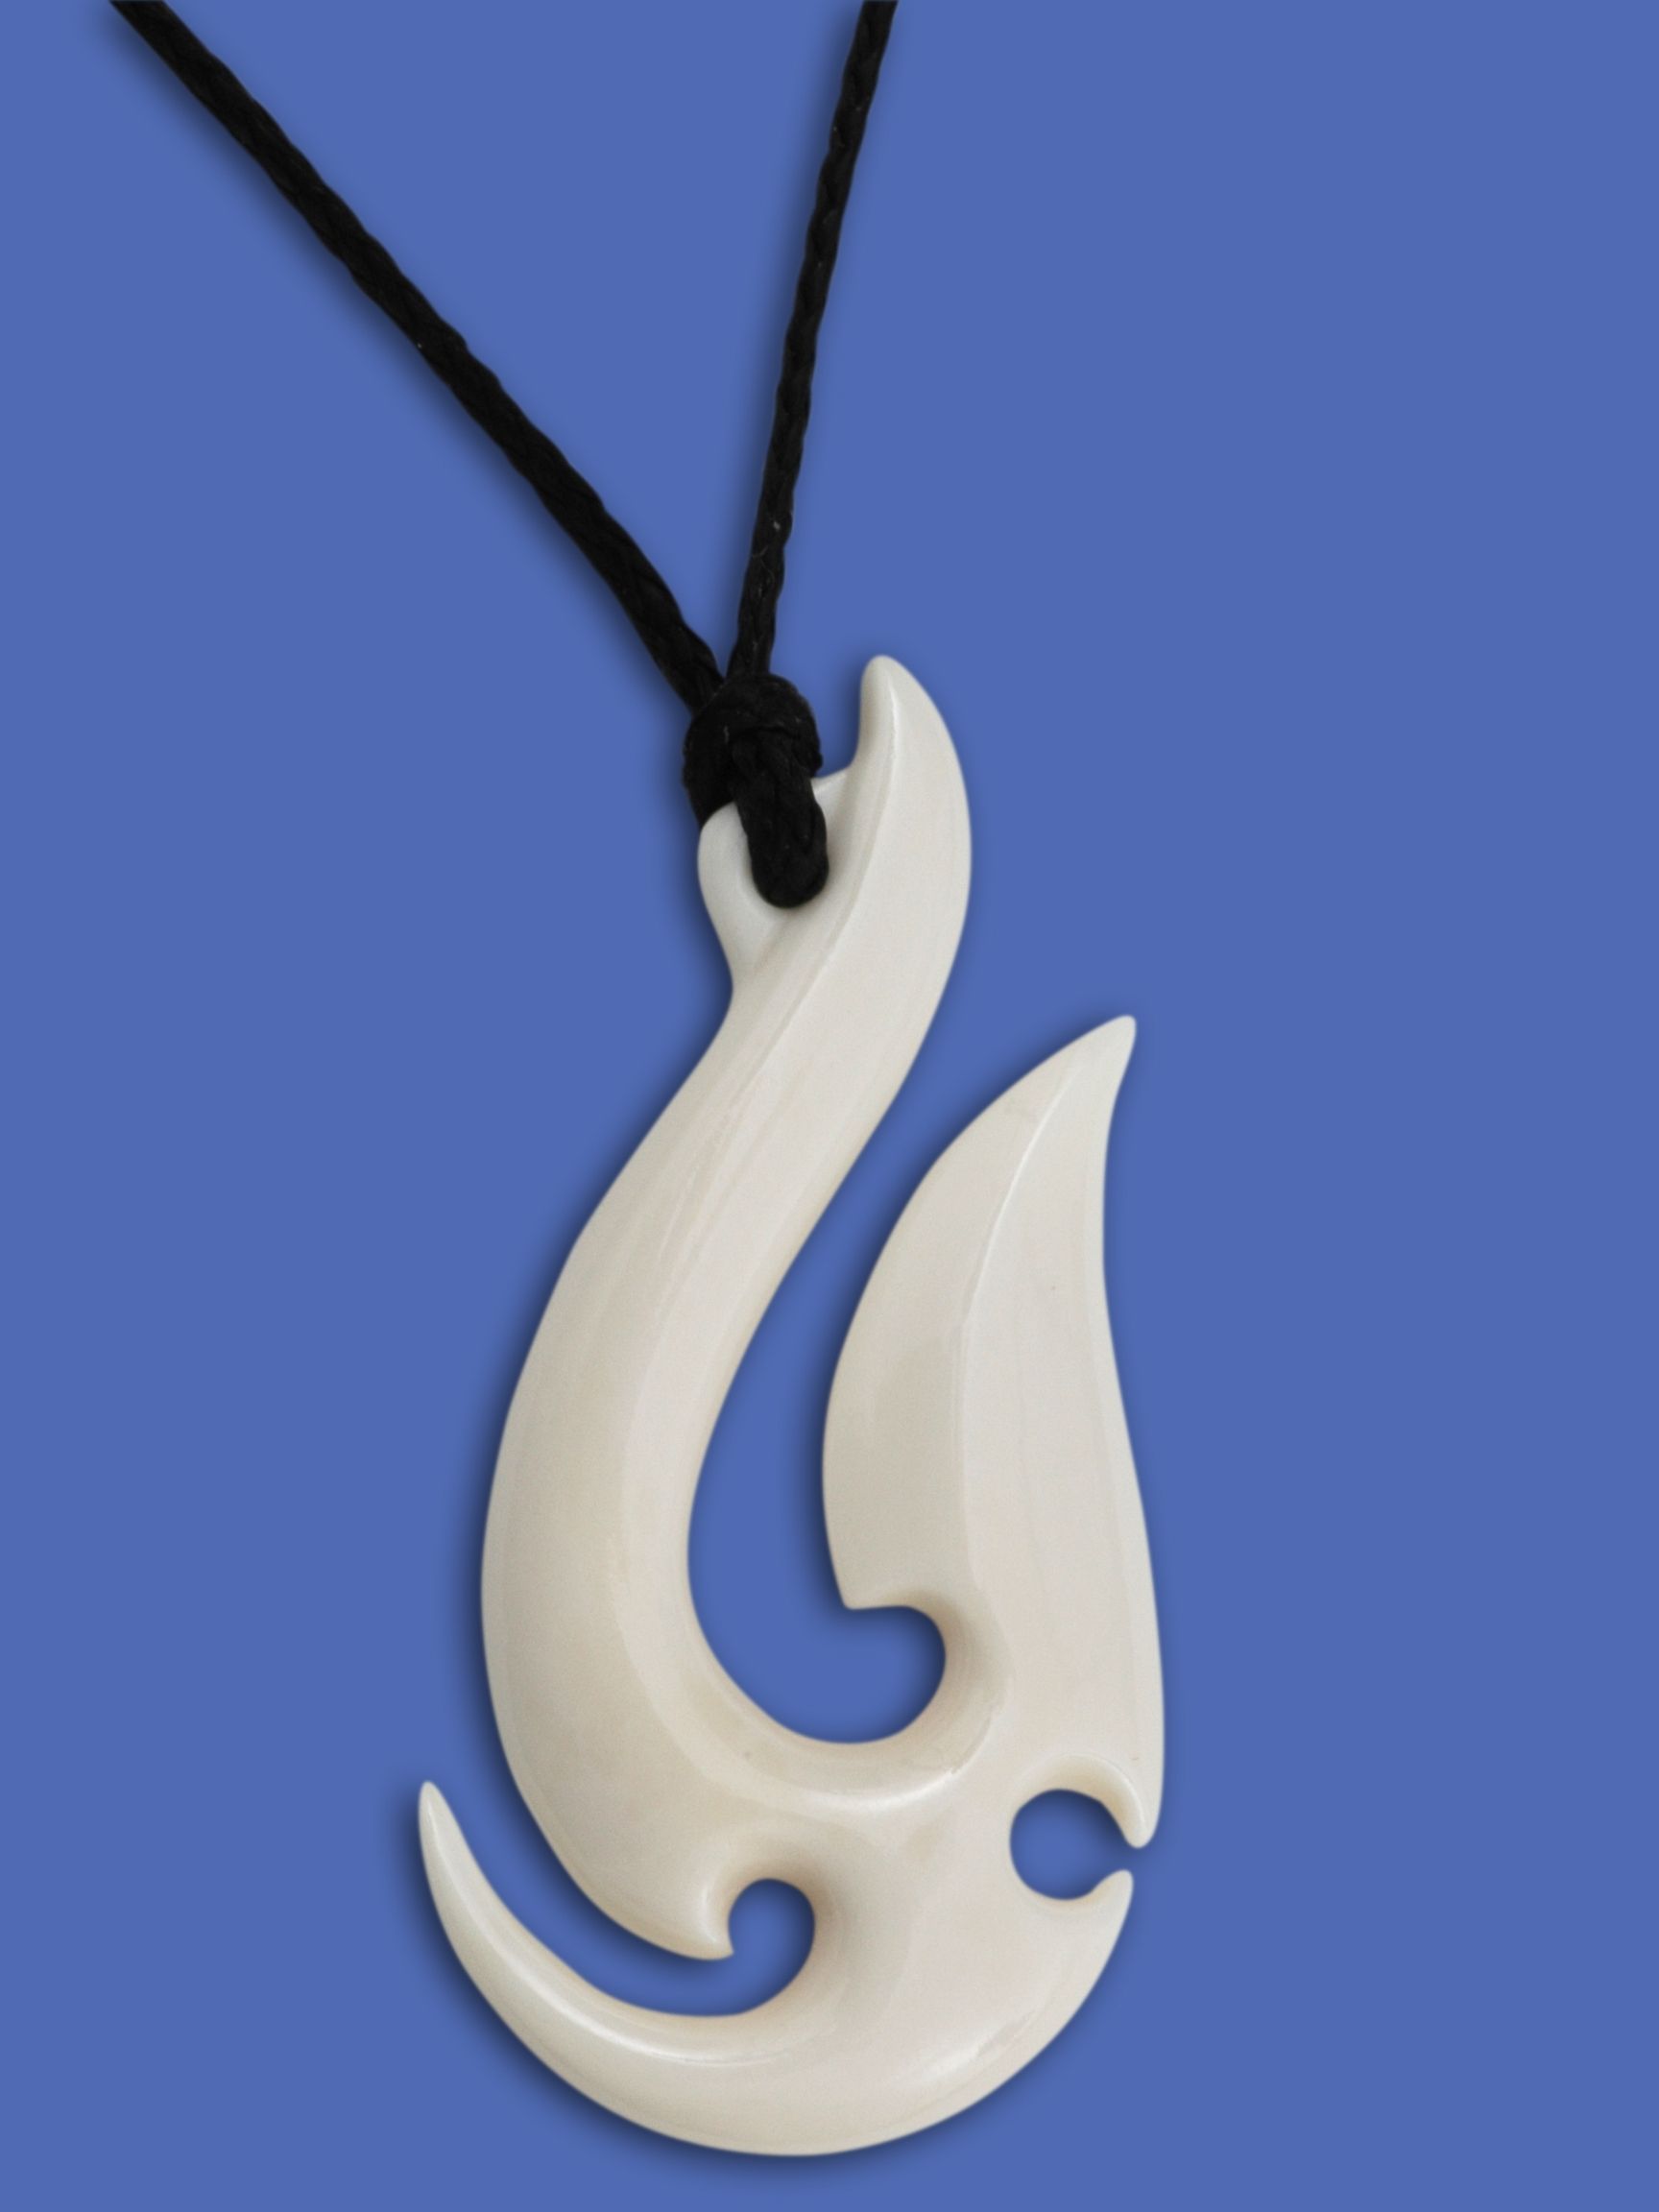 The fish hook symbol brings good luck to those who wear it